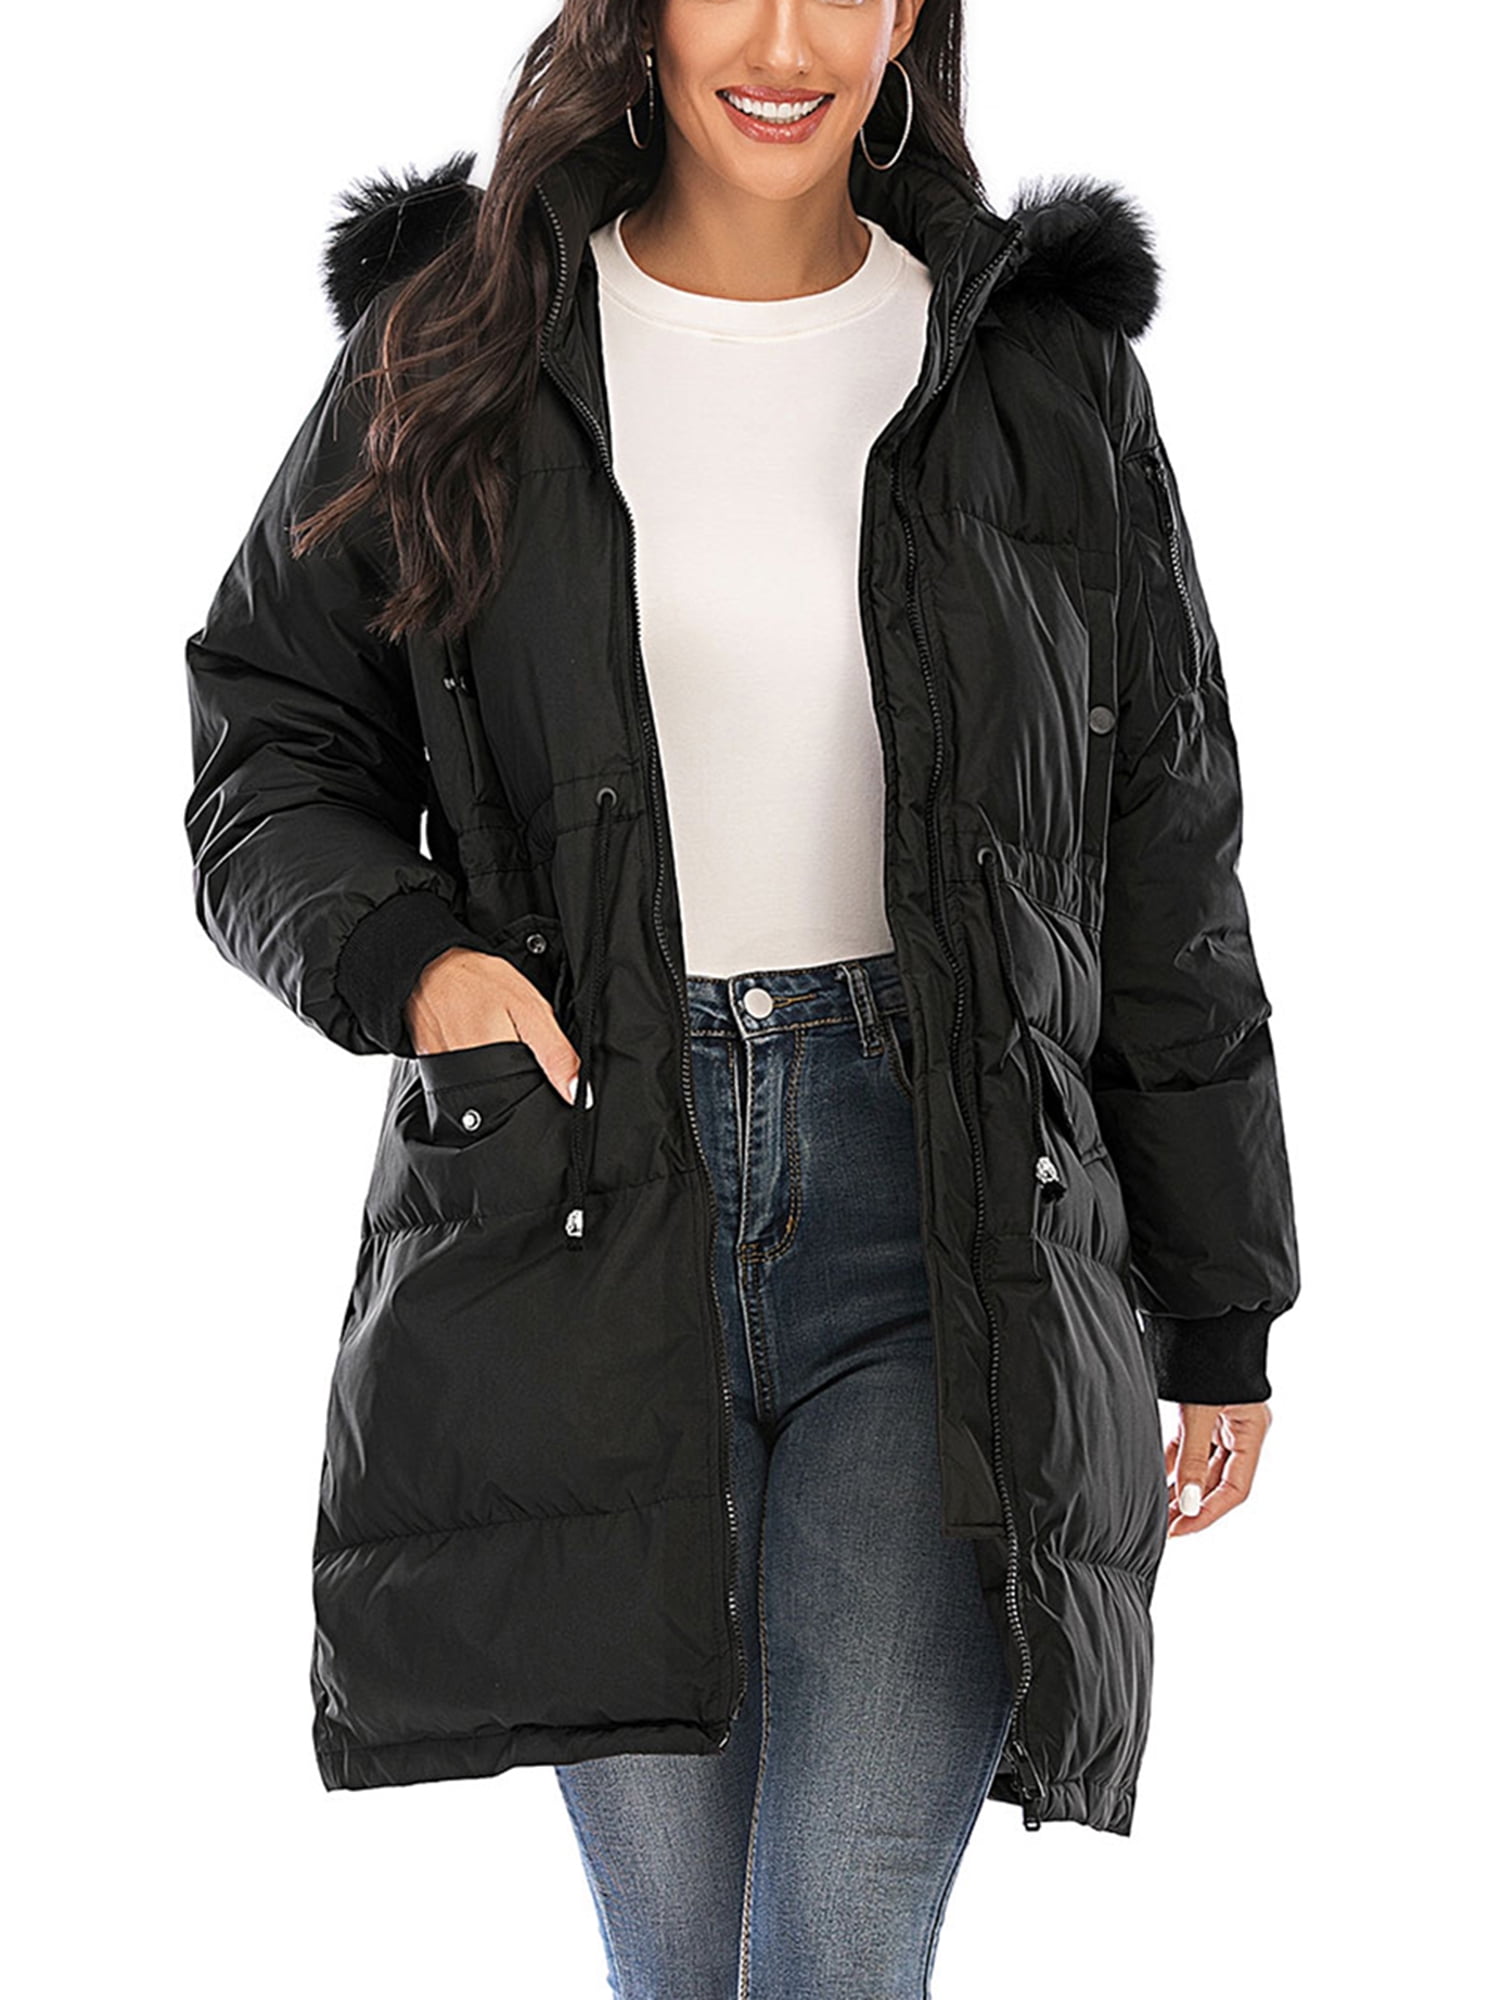 Sayfut Women's Winter Mid Length Hooded Sherpa Lined Parka Jacket Lightweight Drawstring with Hooded Winter Coat, Size: Large, Black